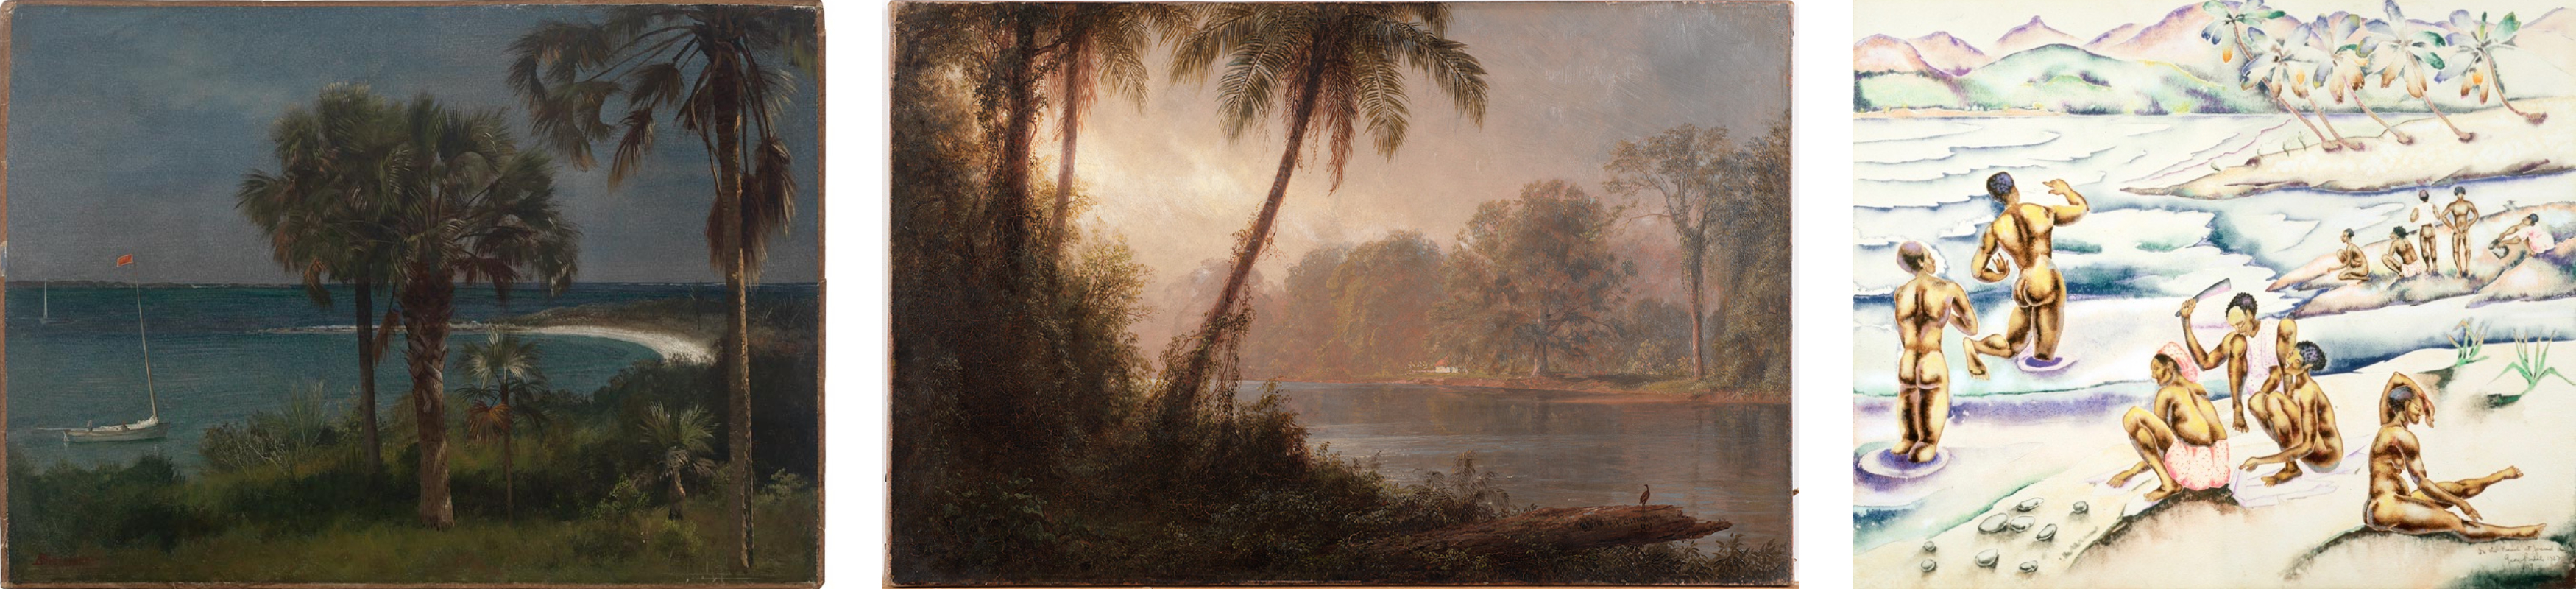 Three images: moody, dark beach with a palm trees; palm trees and greenery at dusk on a waterfront; bathers on the sand and in the waves of a beachfront